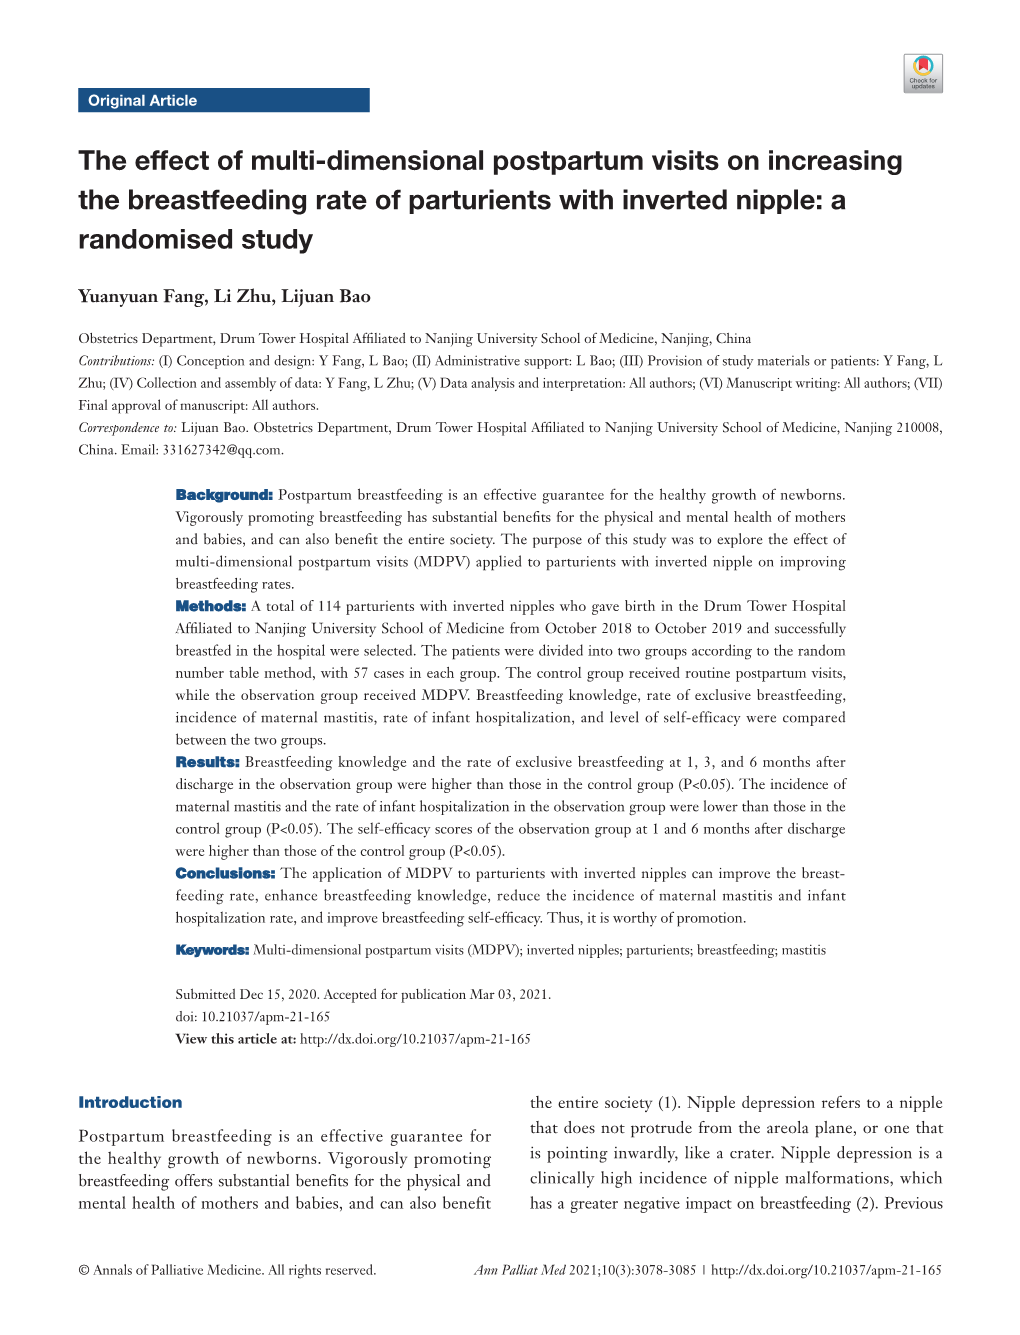 The Effect of Multi-Dimensional Postpartum Visits on Increasing the Breastfeeding Rate of Parturients with Inverted Nipple: a Randomised Study